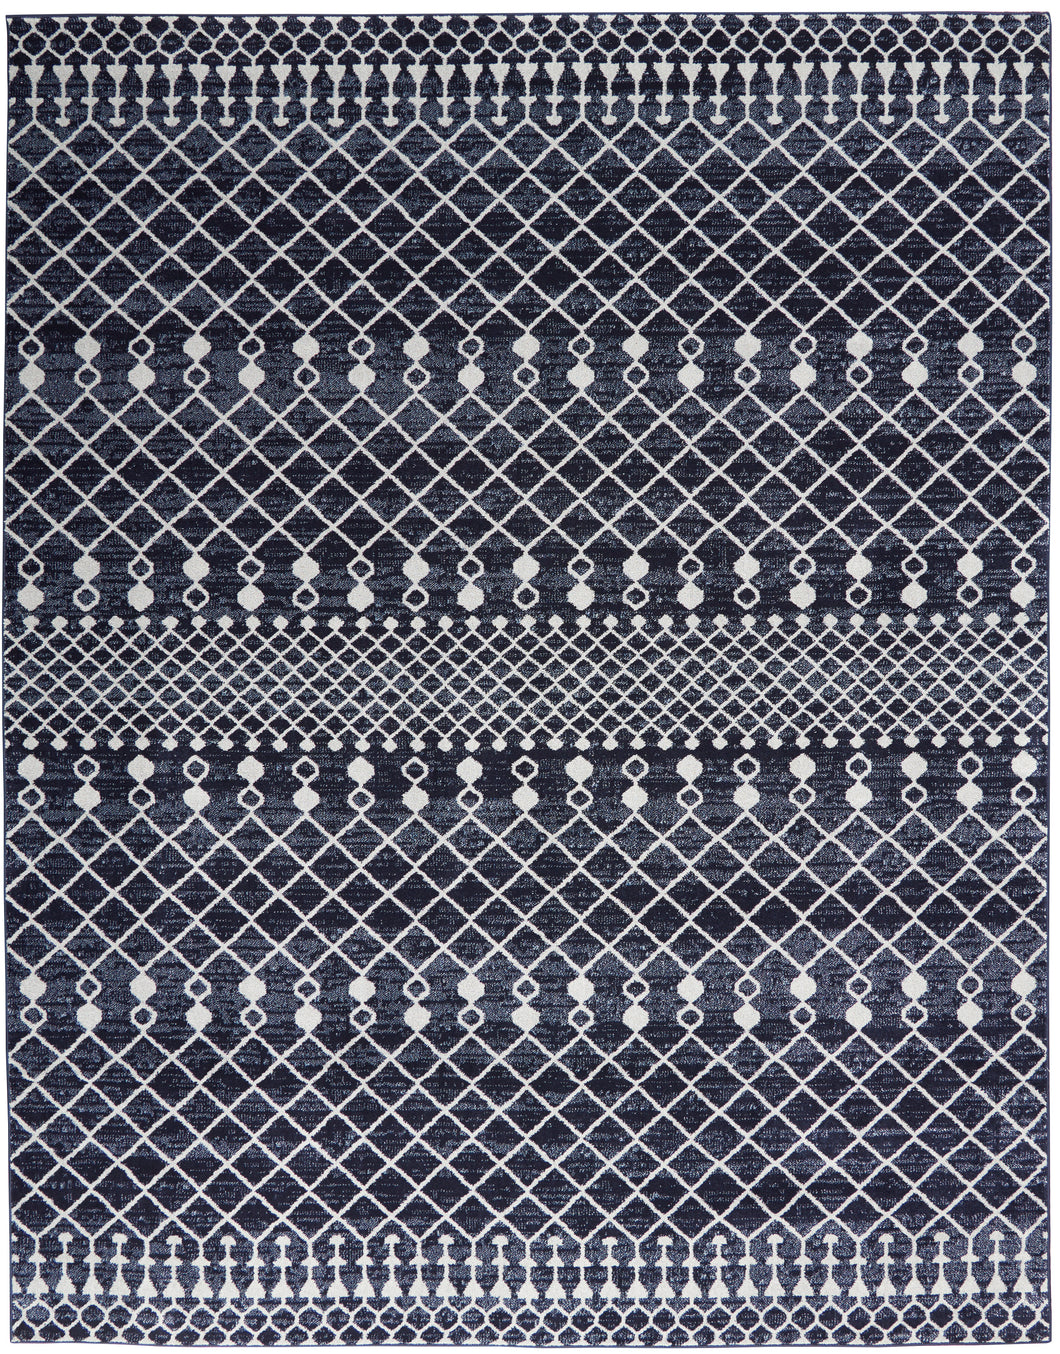 Nourison Palermo 7' x 10' Navy and Grey Distressed Bohemian Area Rug PMR03 Navy/Grey